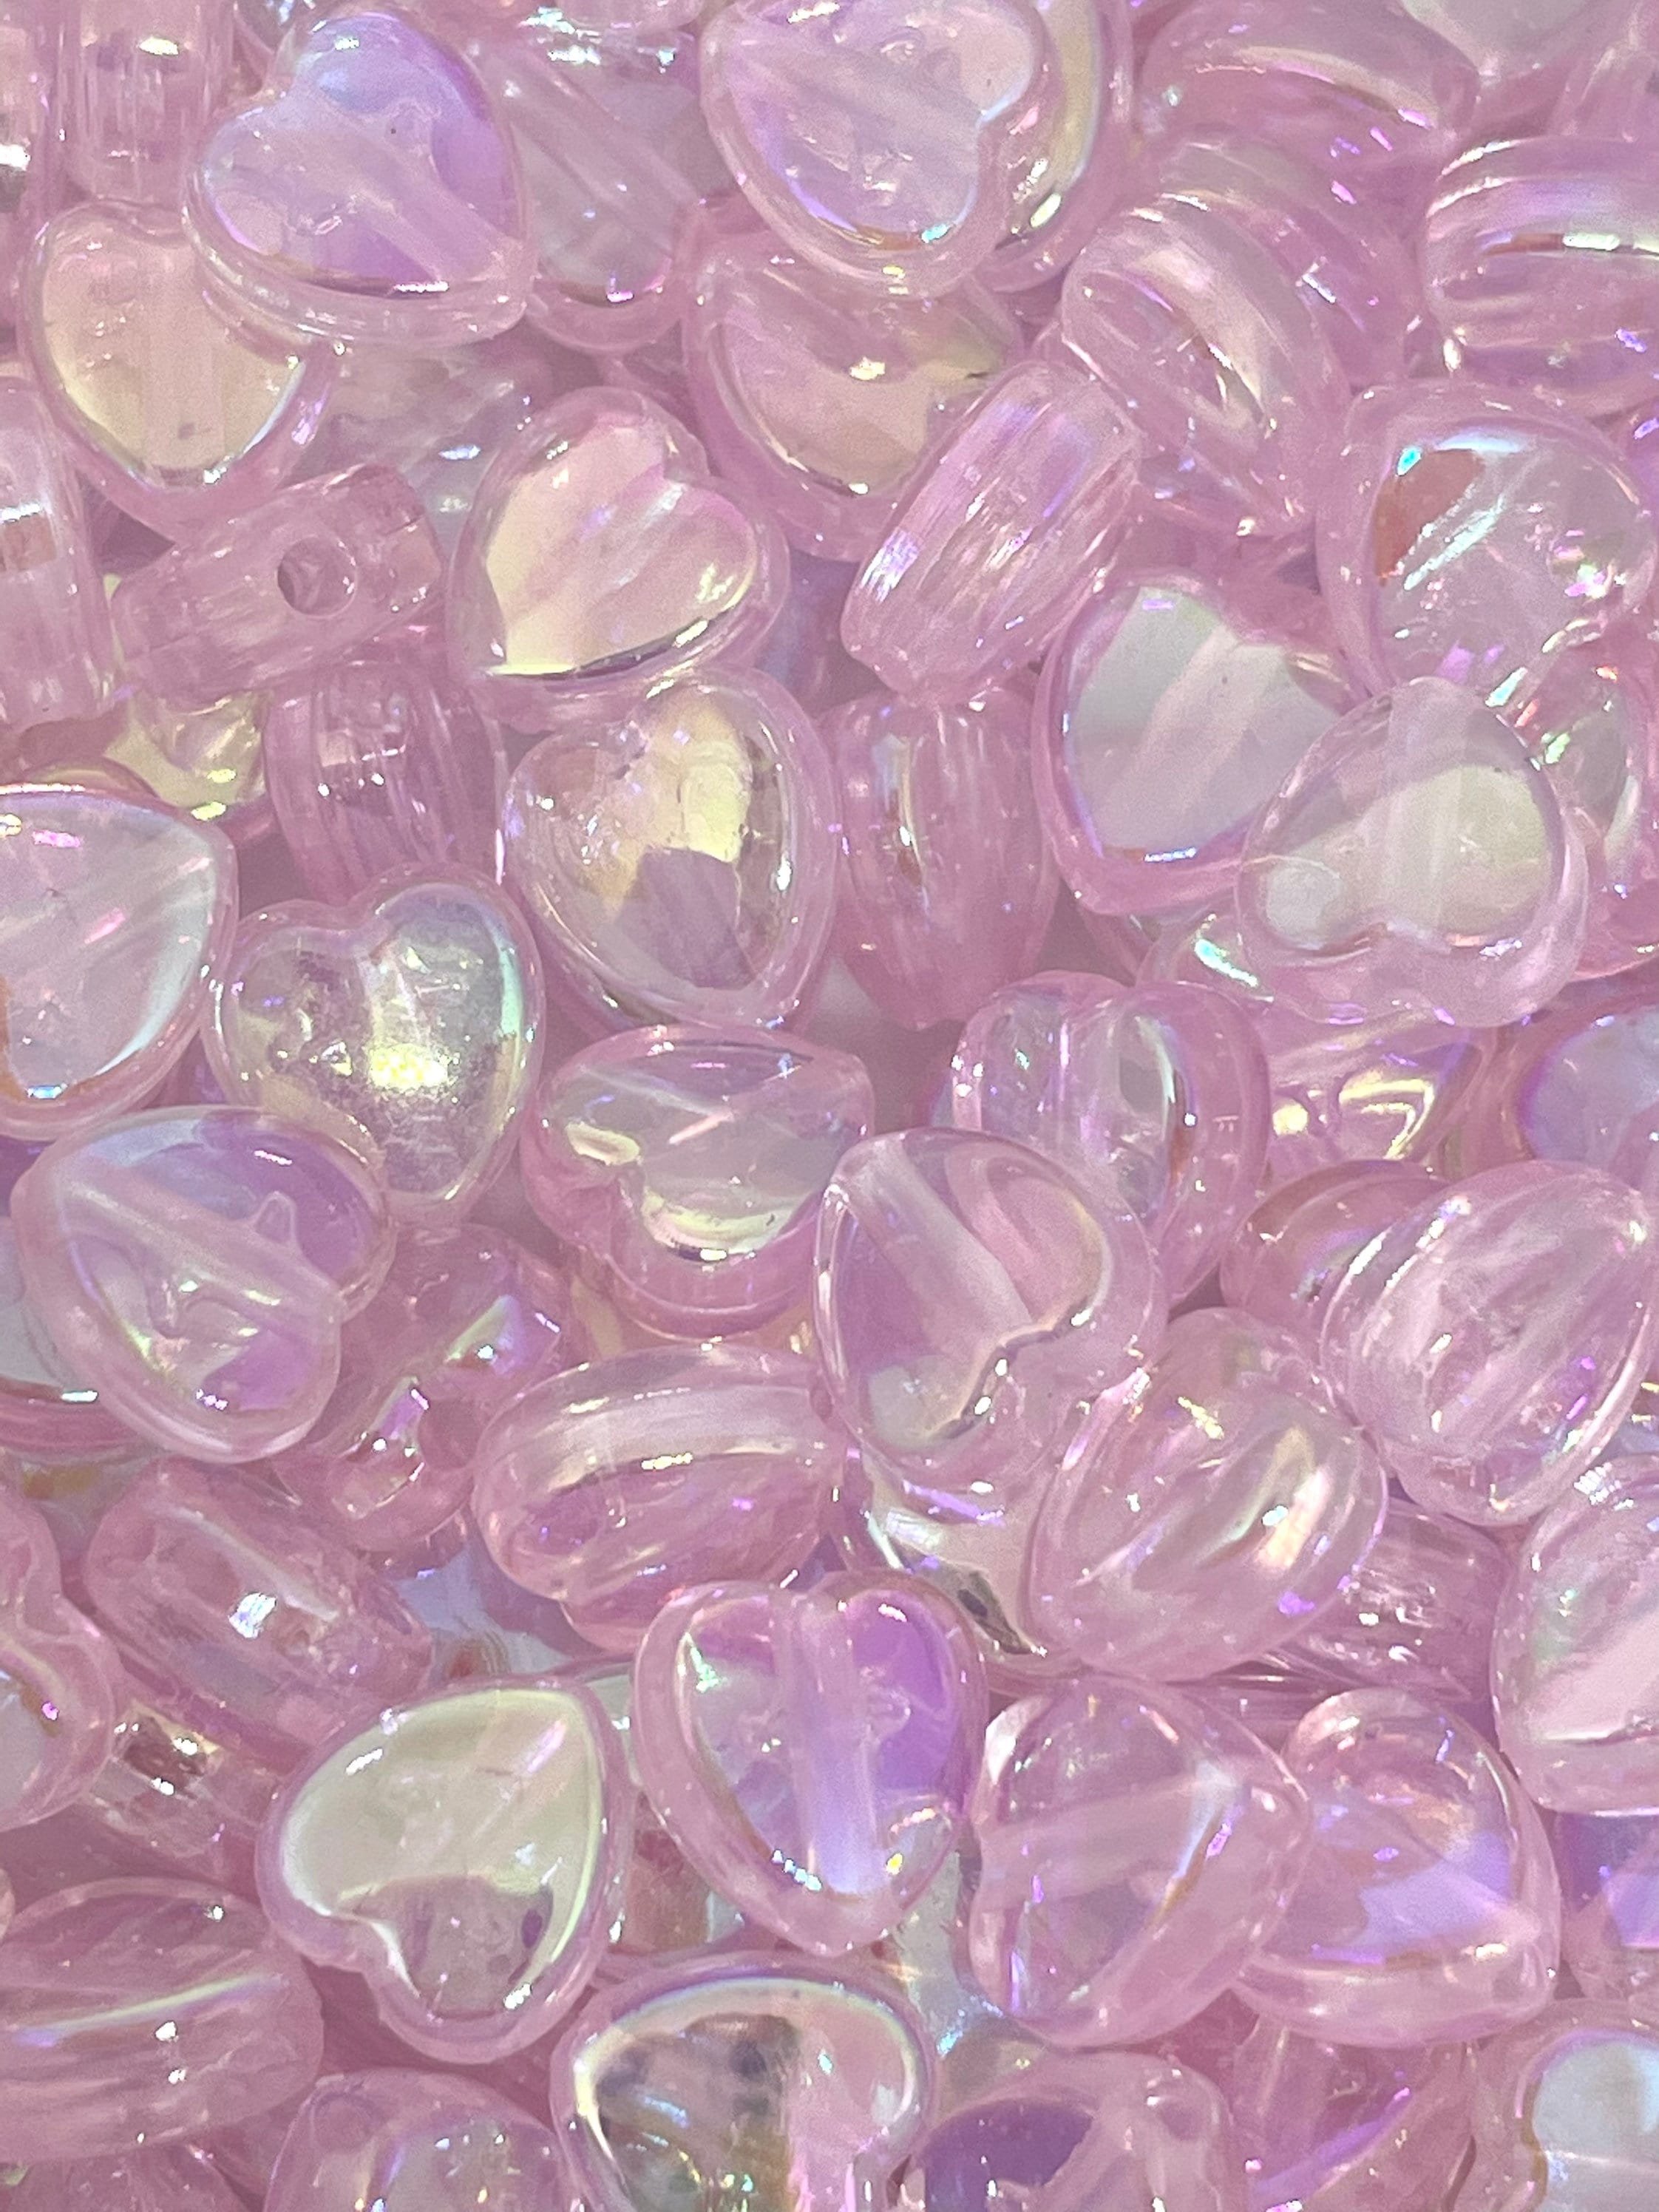 Pink Heart Beads for Bracelet, Pink Beads, 8mm Beads, Clear Beads for